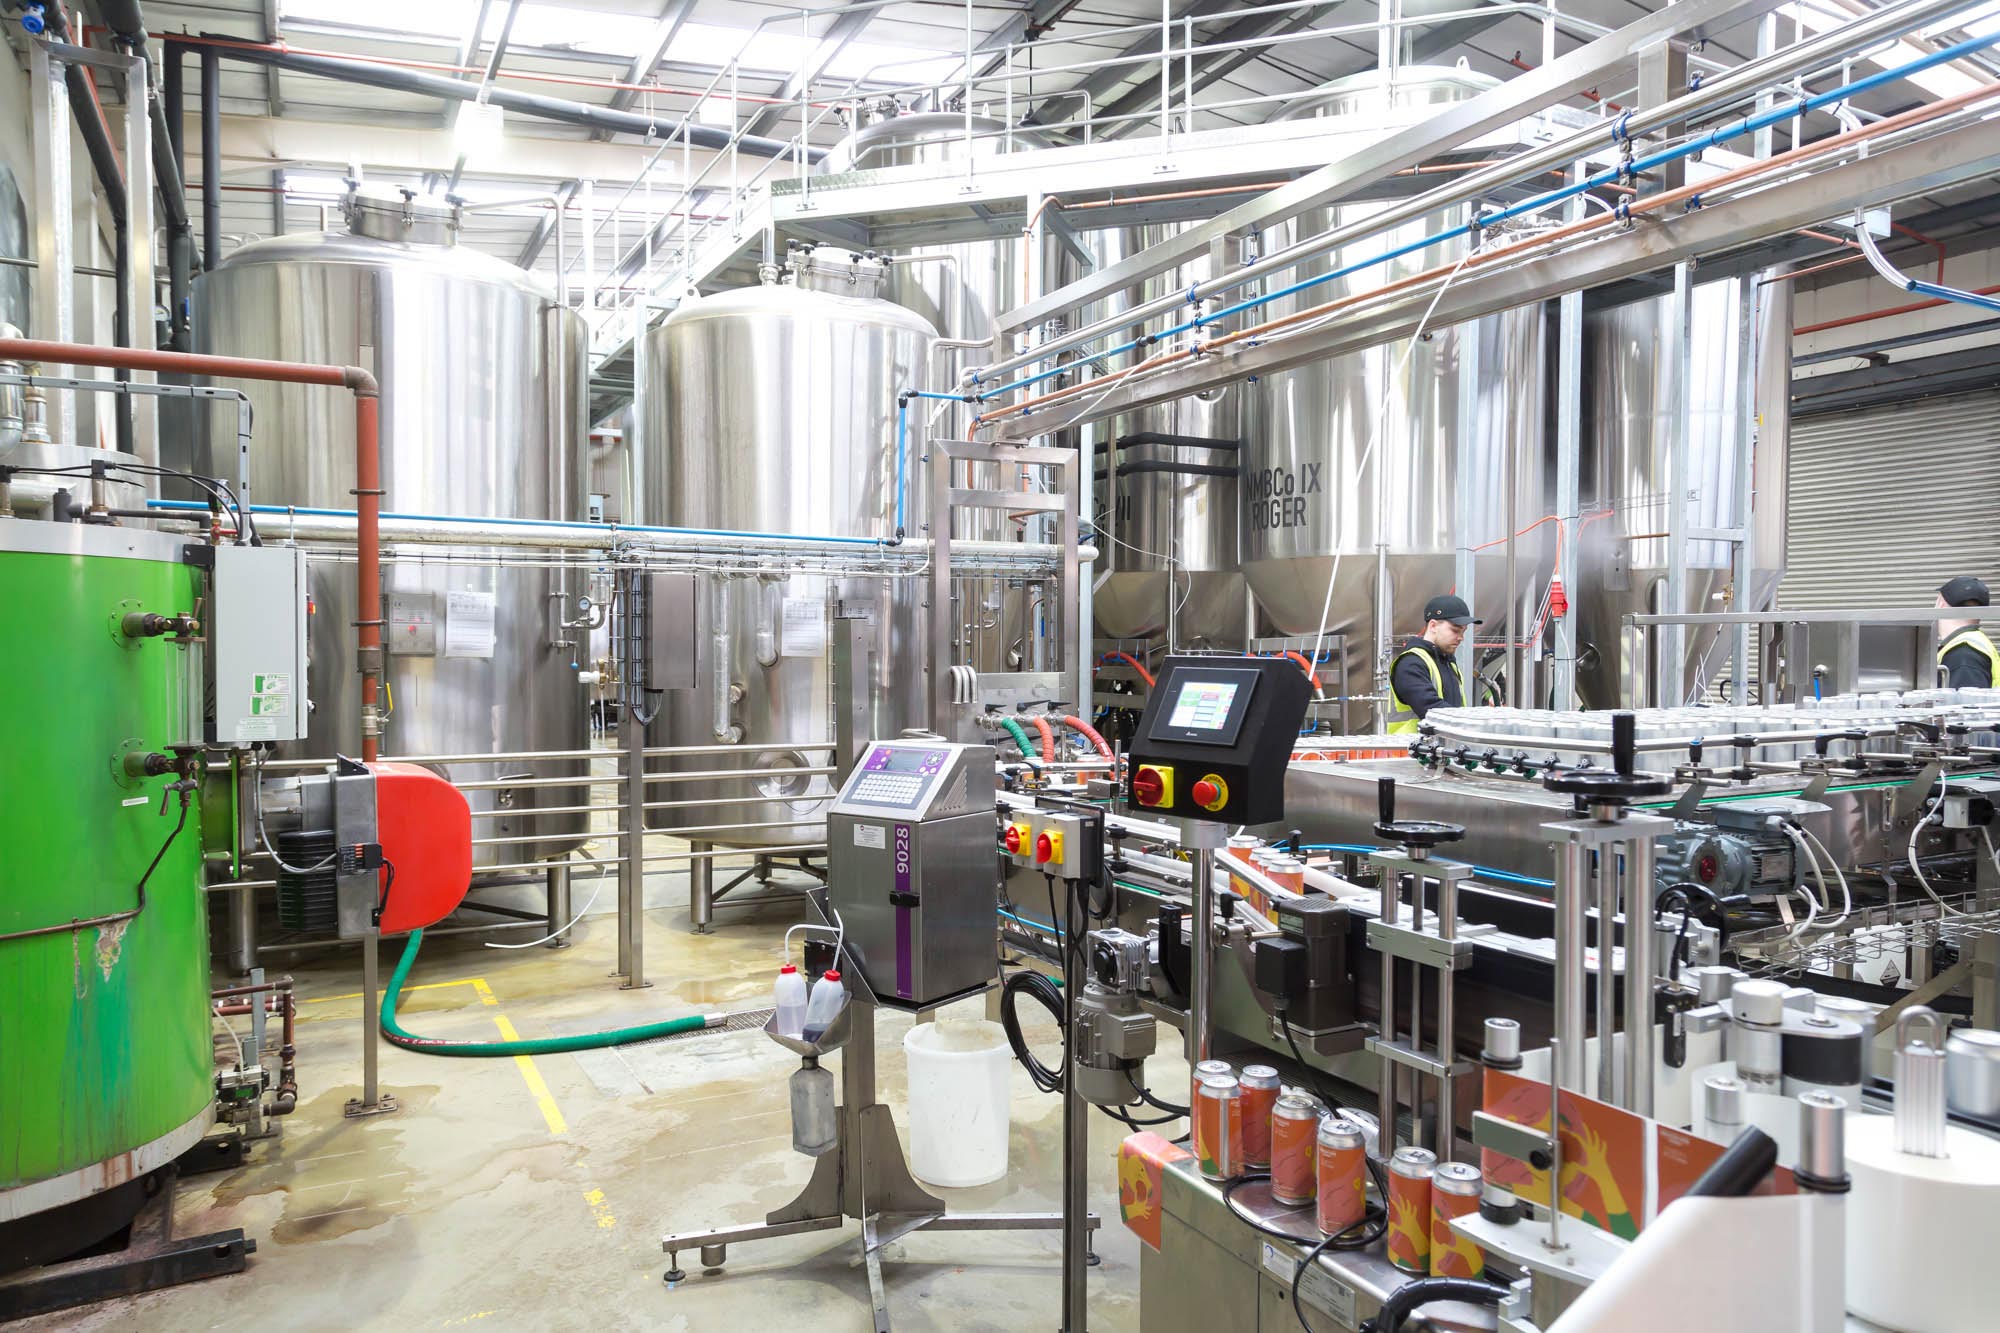 interior image of Northern Monk brewery with various brewery equipment including a canning machine